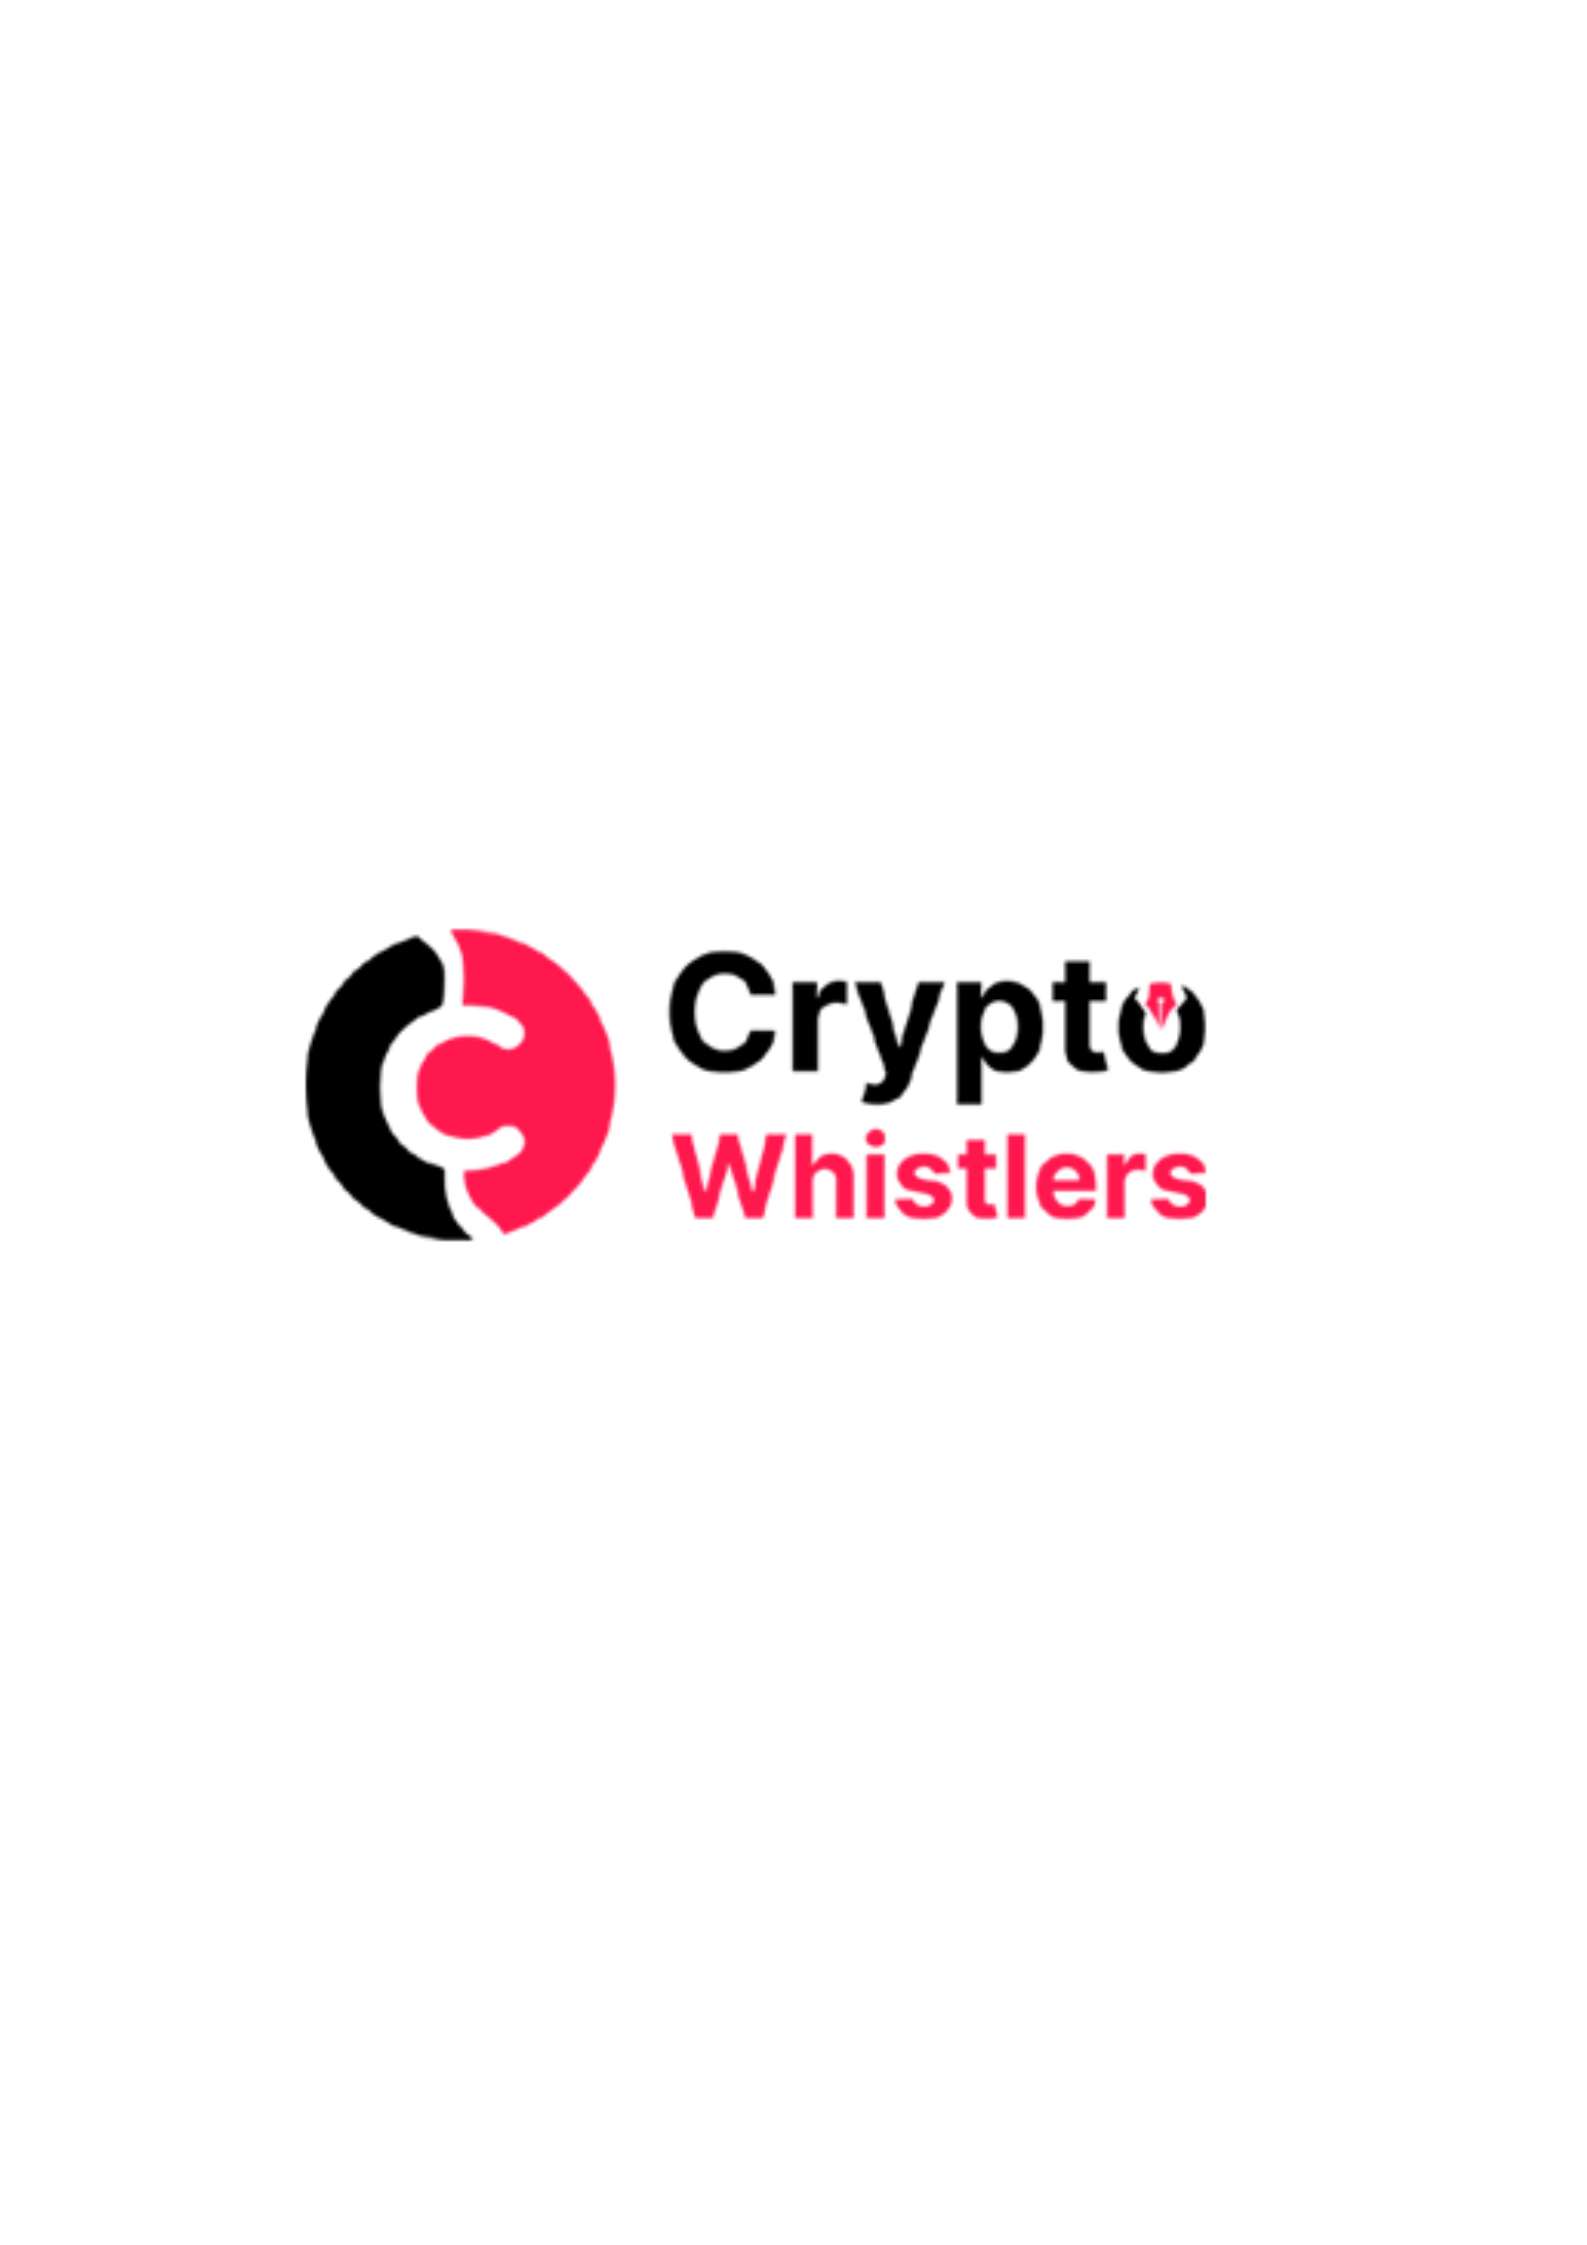 Crypto Whistlers Profile Picture